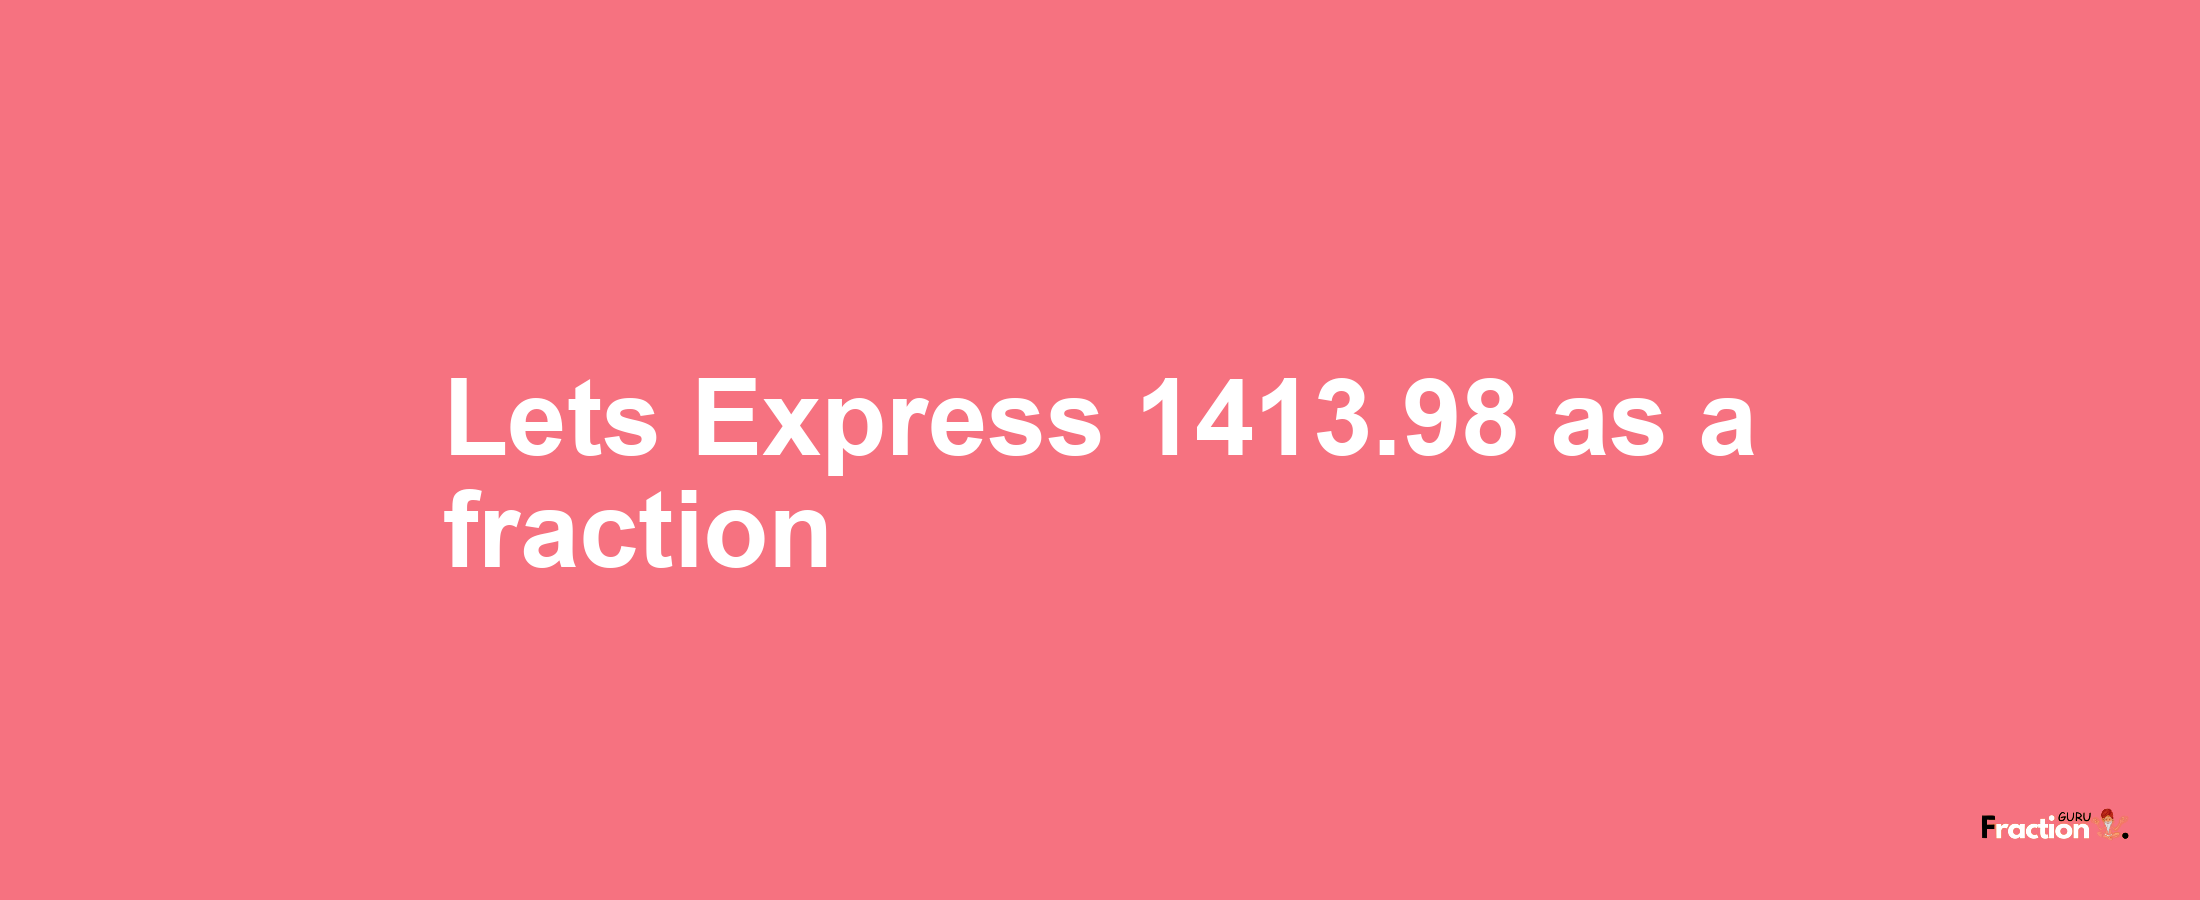 Lets Express 1413.98 as afraction